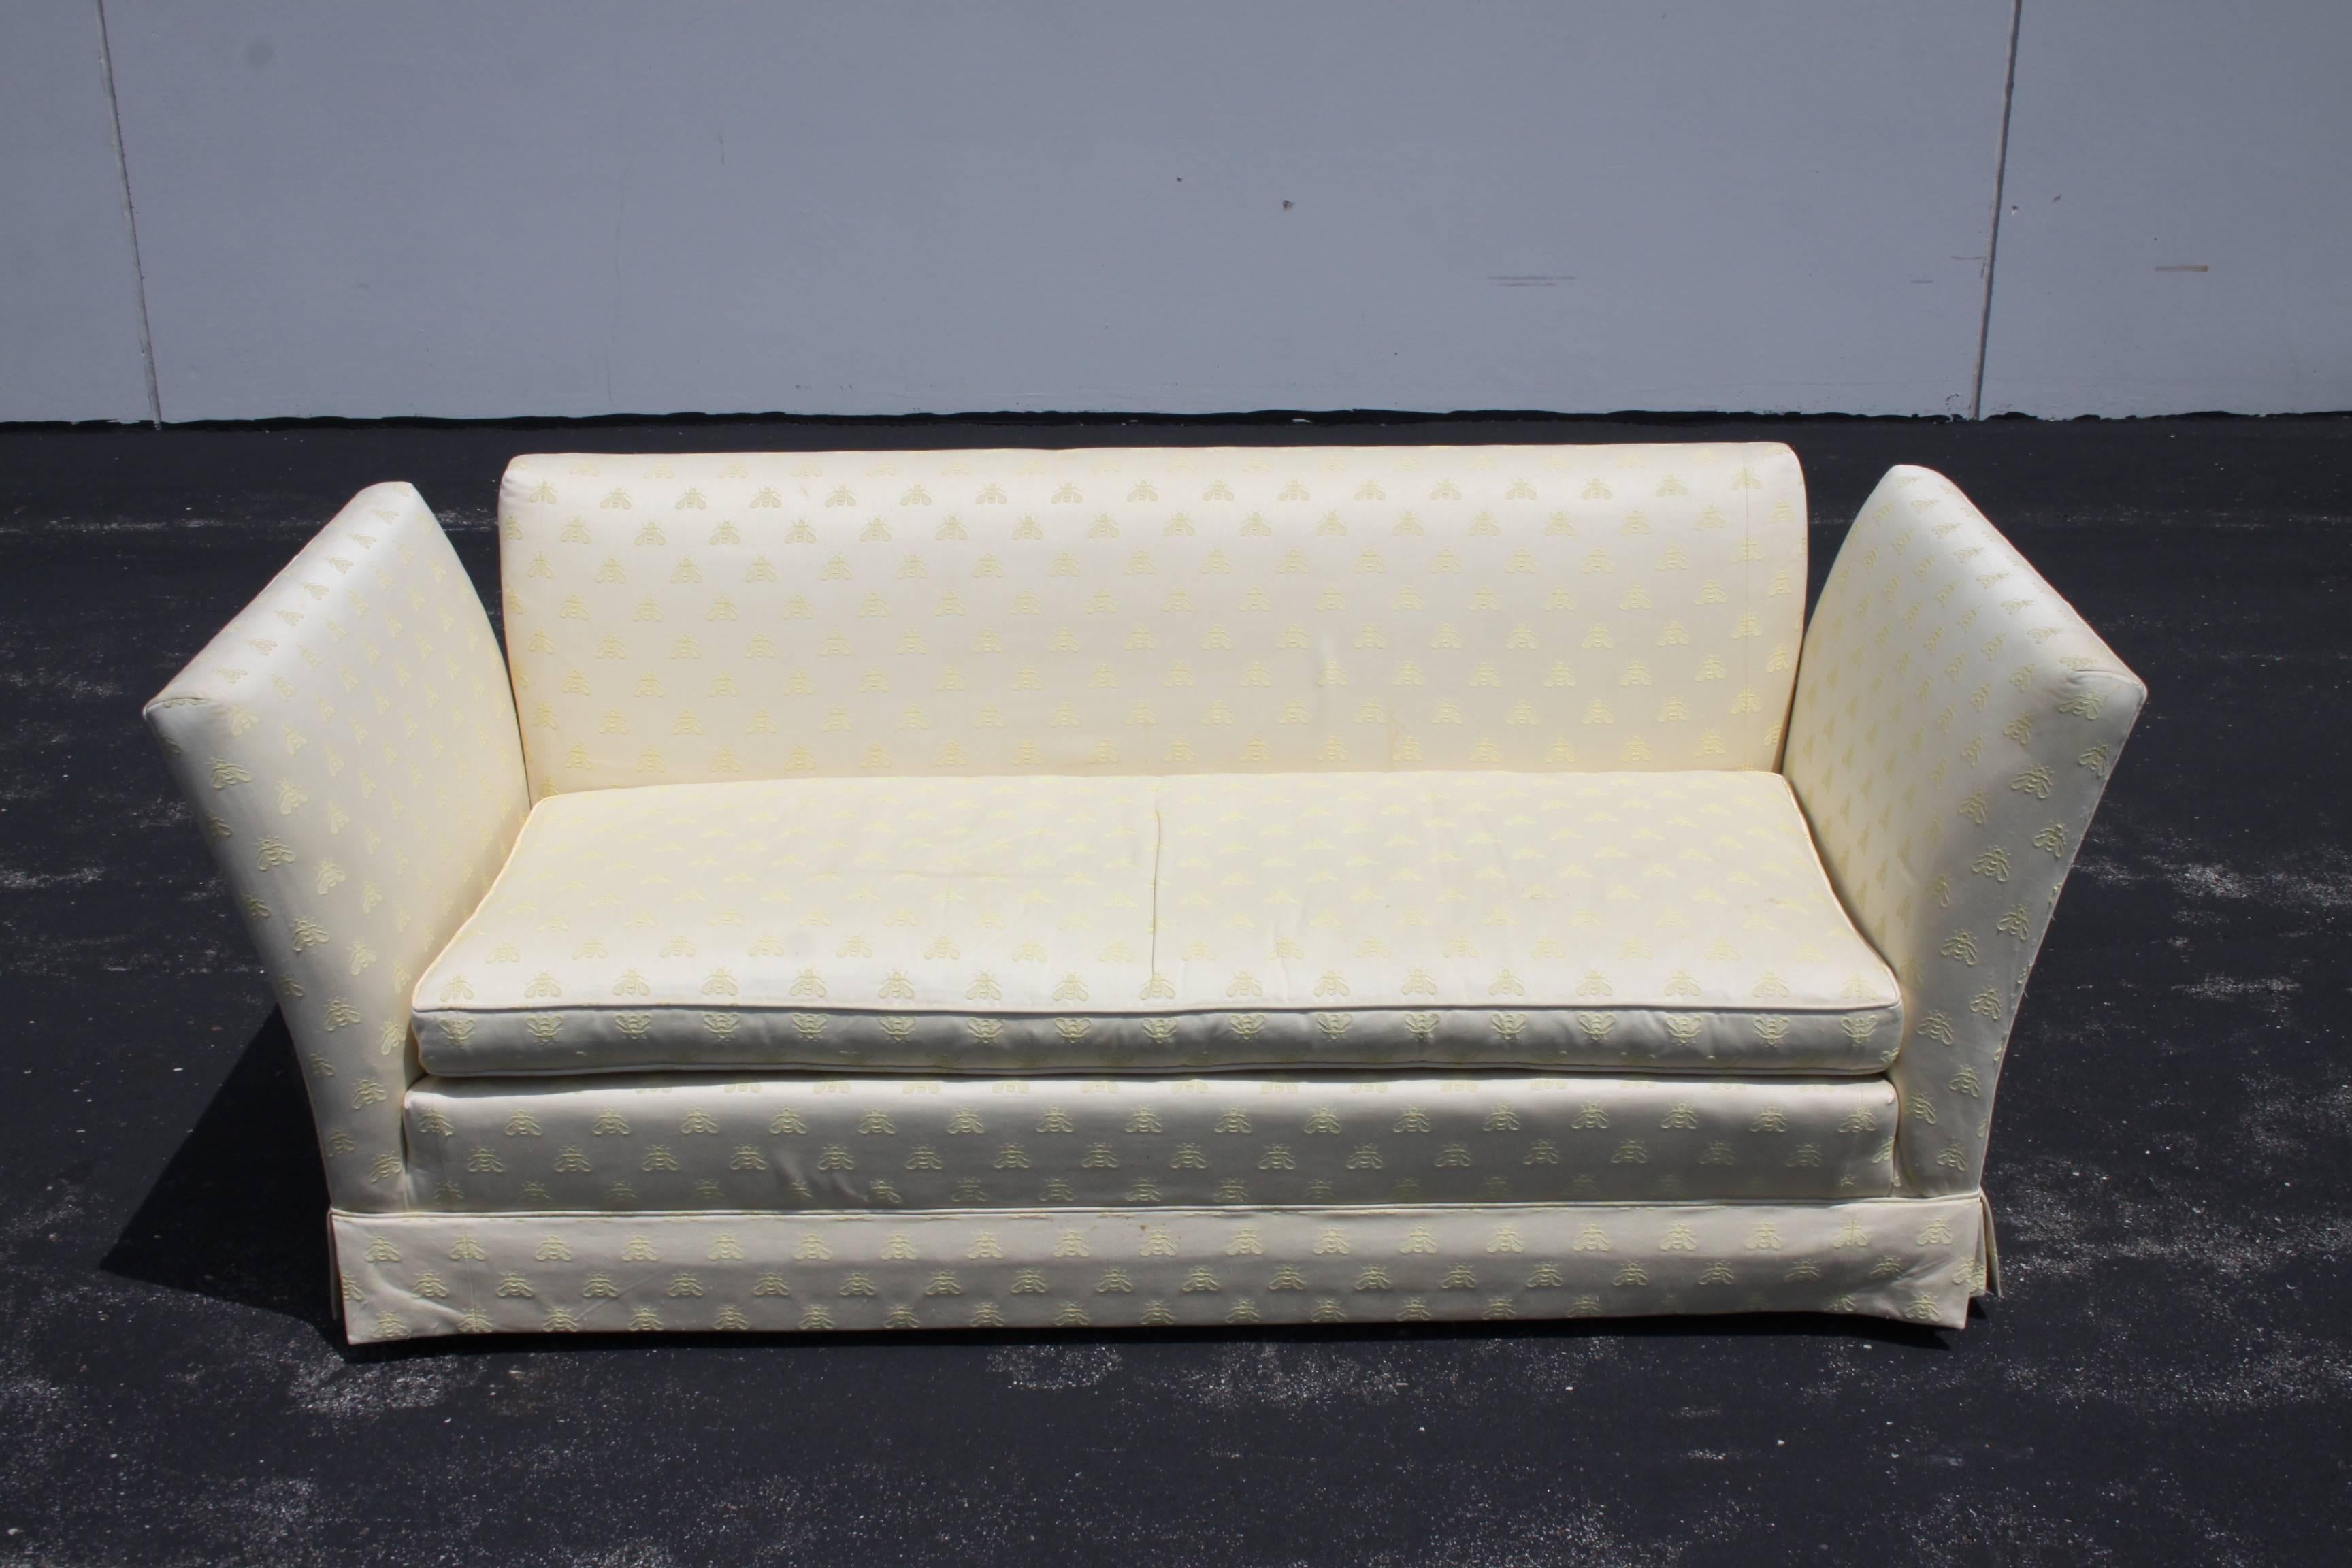 Baker Furniture Knole open-arm settee or loveseat sofa, circa 1970s. This sofa has been reupholstered at some point, upholstery does show wear and stains. Recommend reupholstery. Original brass acorns included. This is very much in the style of